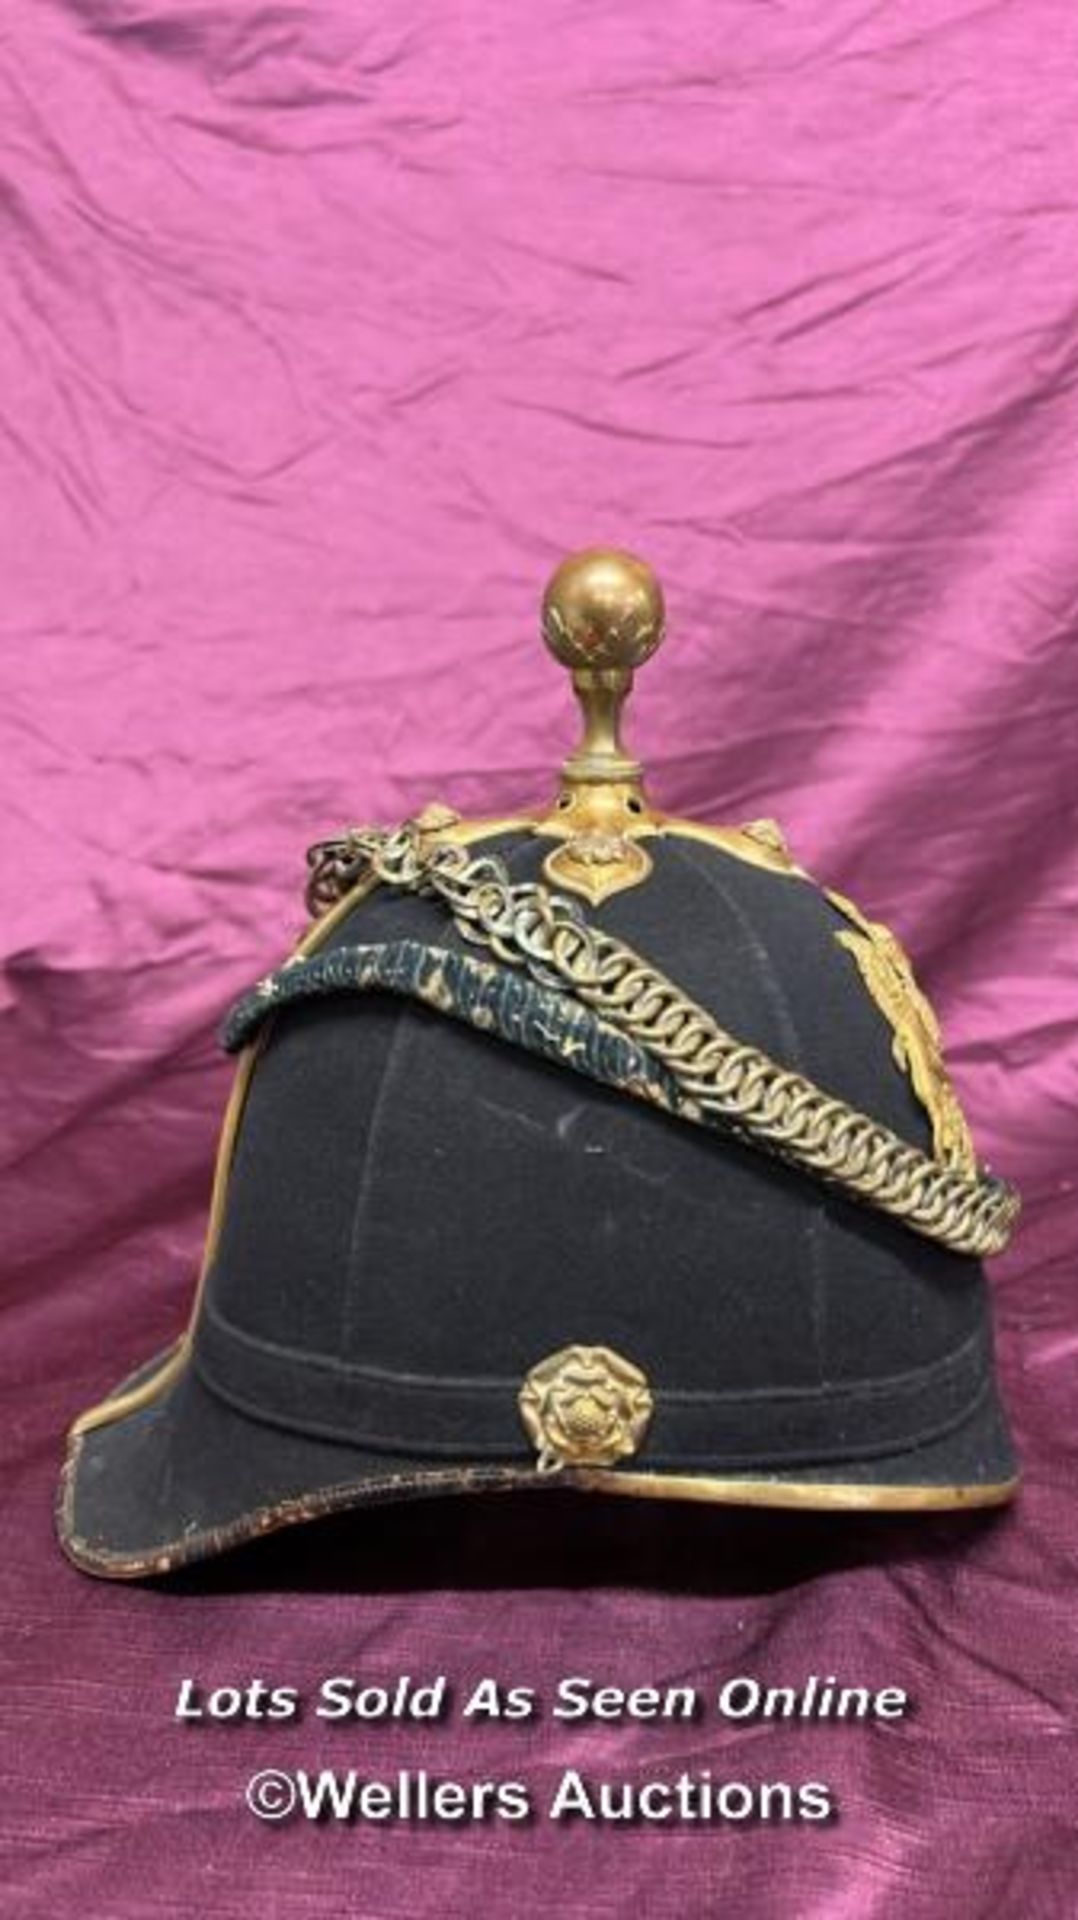 GEORGE V ROYAL ARMY MEDICAL CORPS OFFICER HELMET, IN ORIGINAL CONDITION WITH SOME WEAR, MADE BY - Image 5 of 8